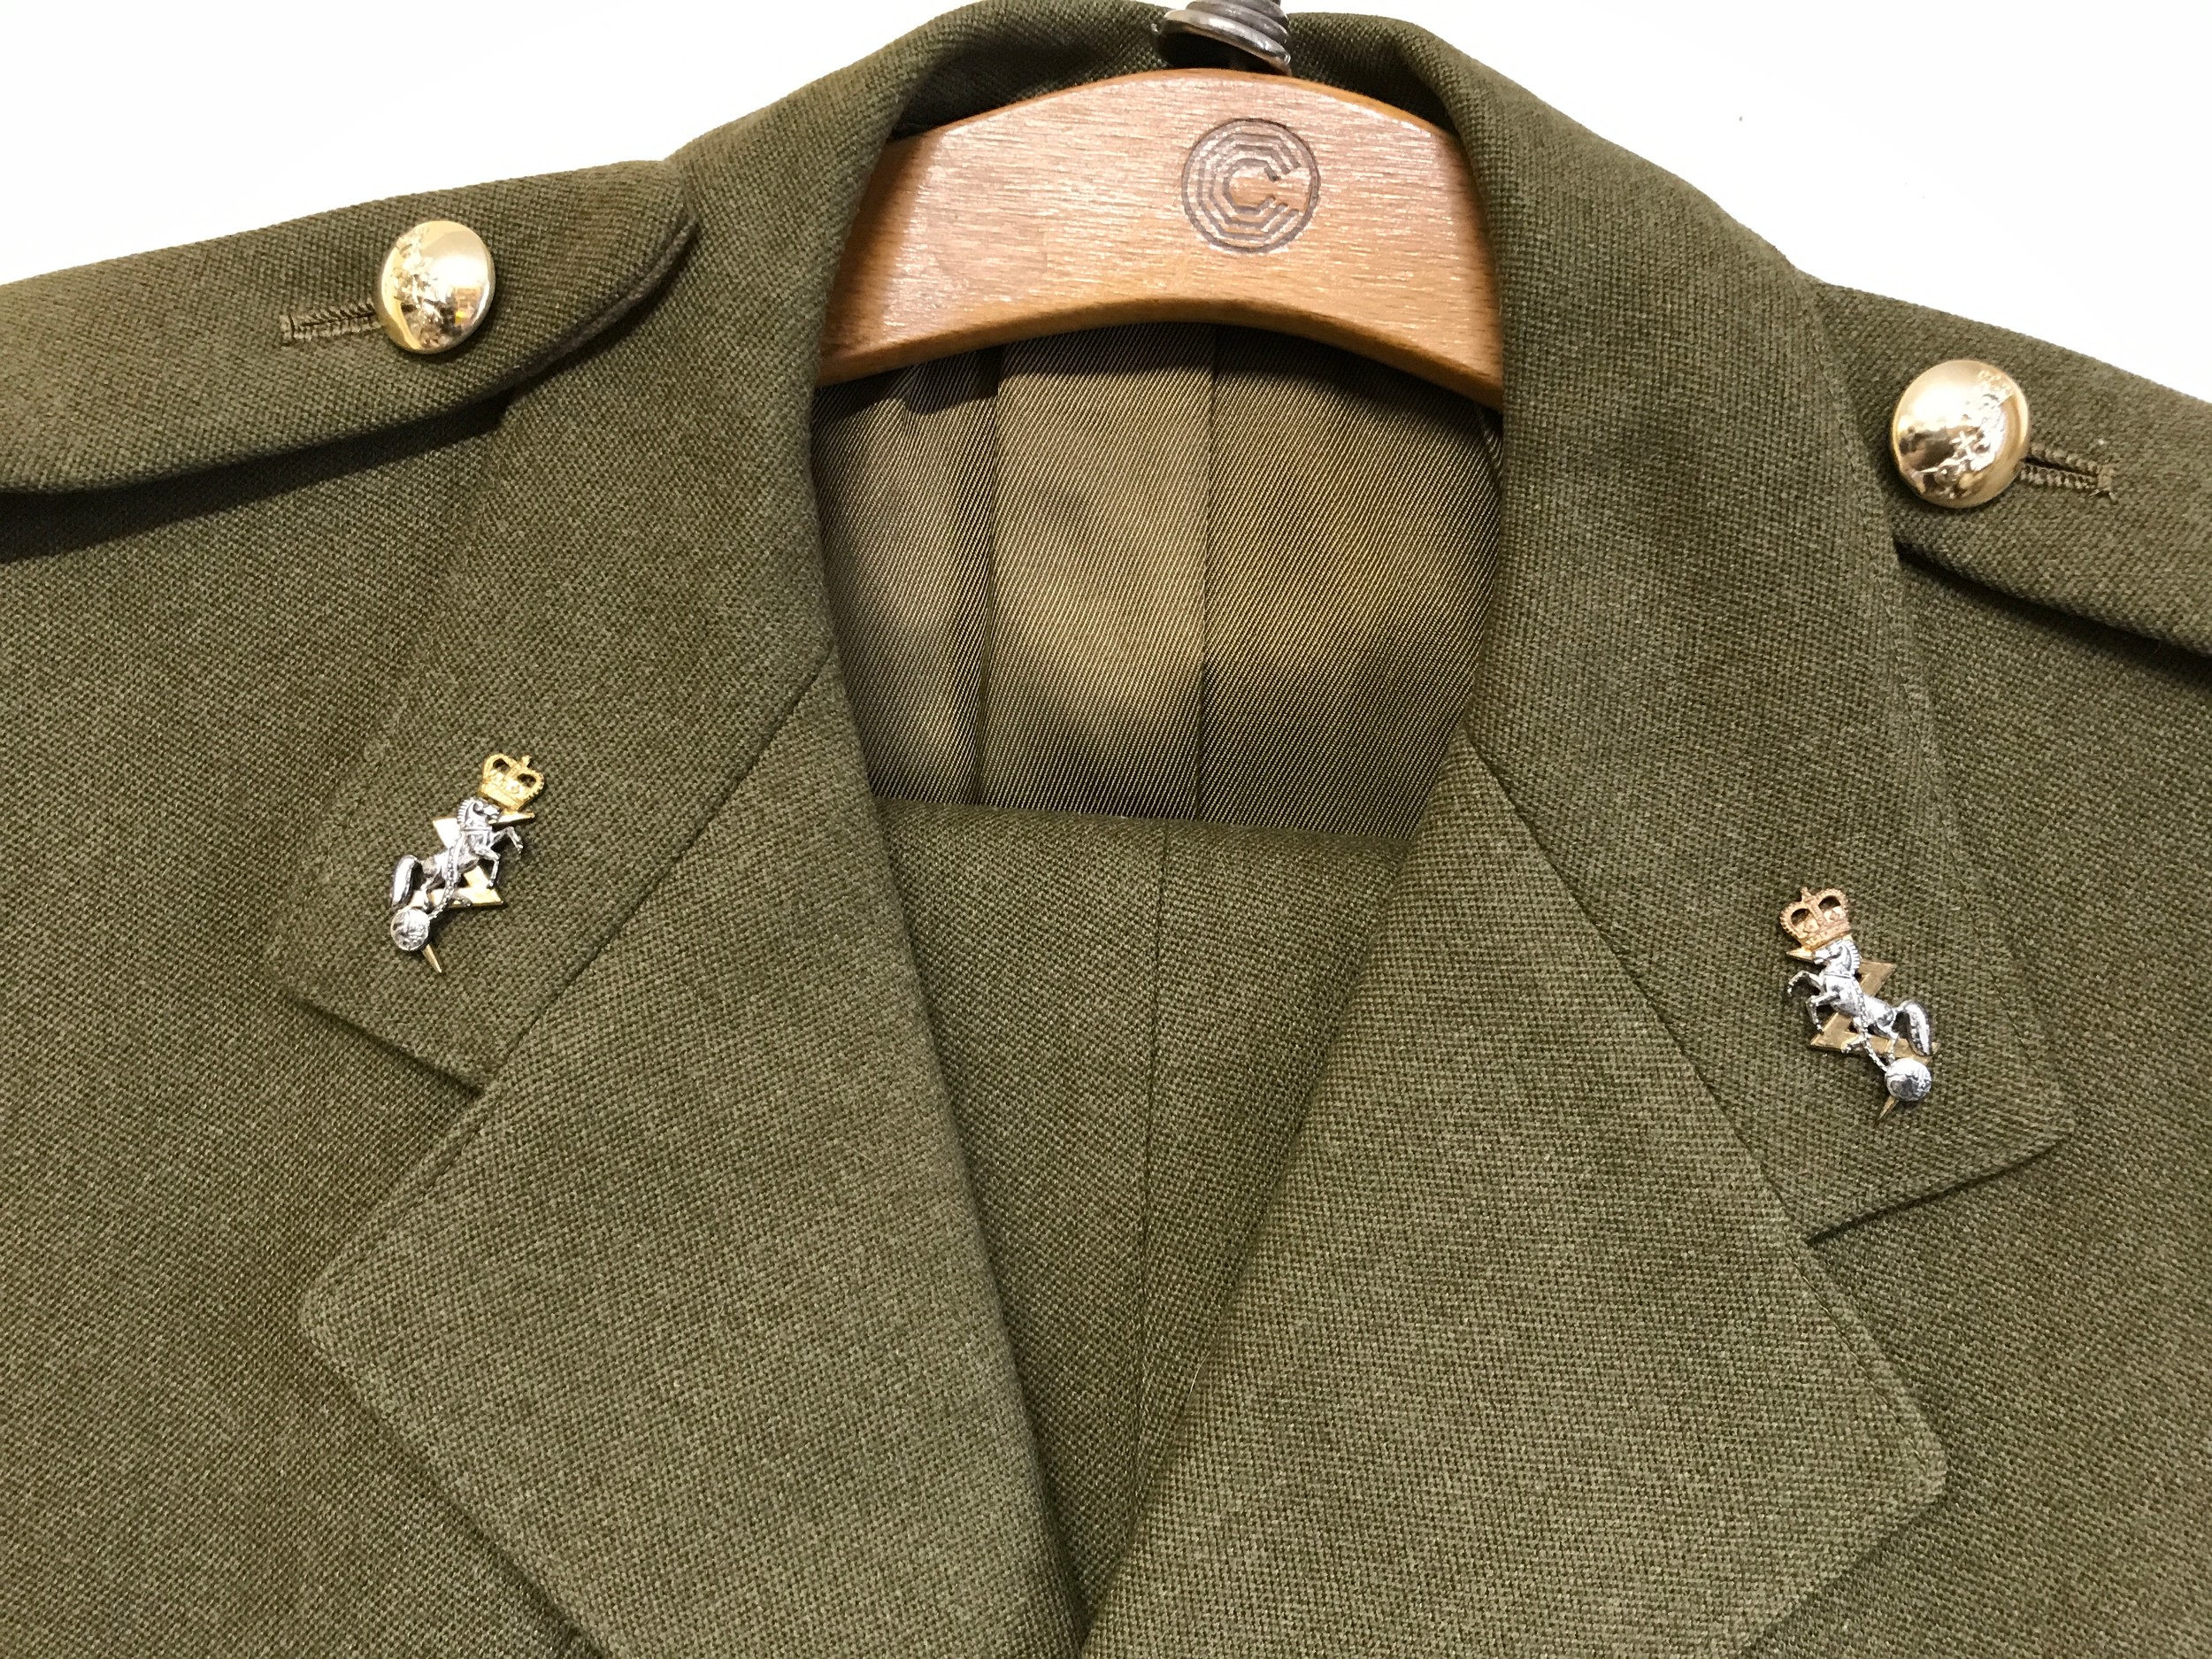 A British military uniform bearing the insignia of the Royal Electrical and Mechanical Engineers. - Image 3 of 6